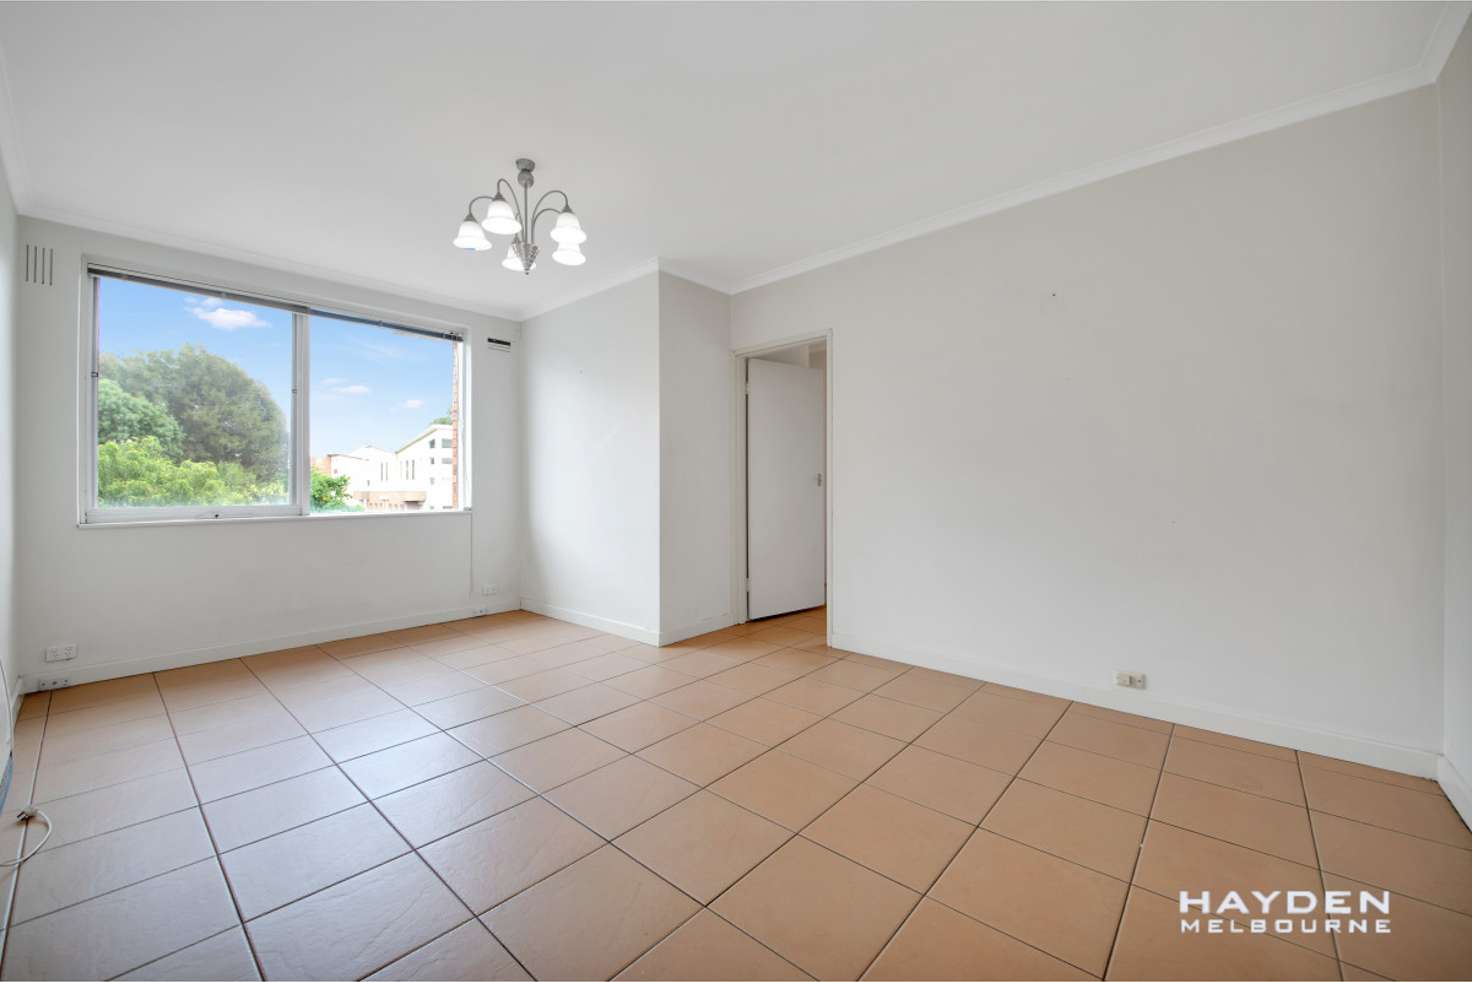 Main view of Homely apartment listing, 12/24 Rooney Street, Maidstone VIC 3012